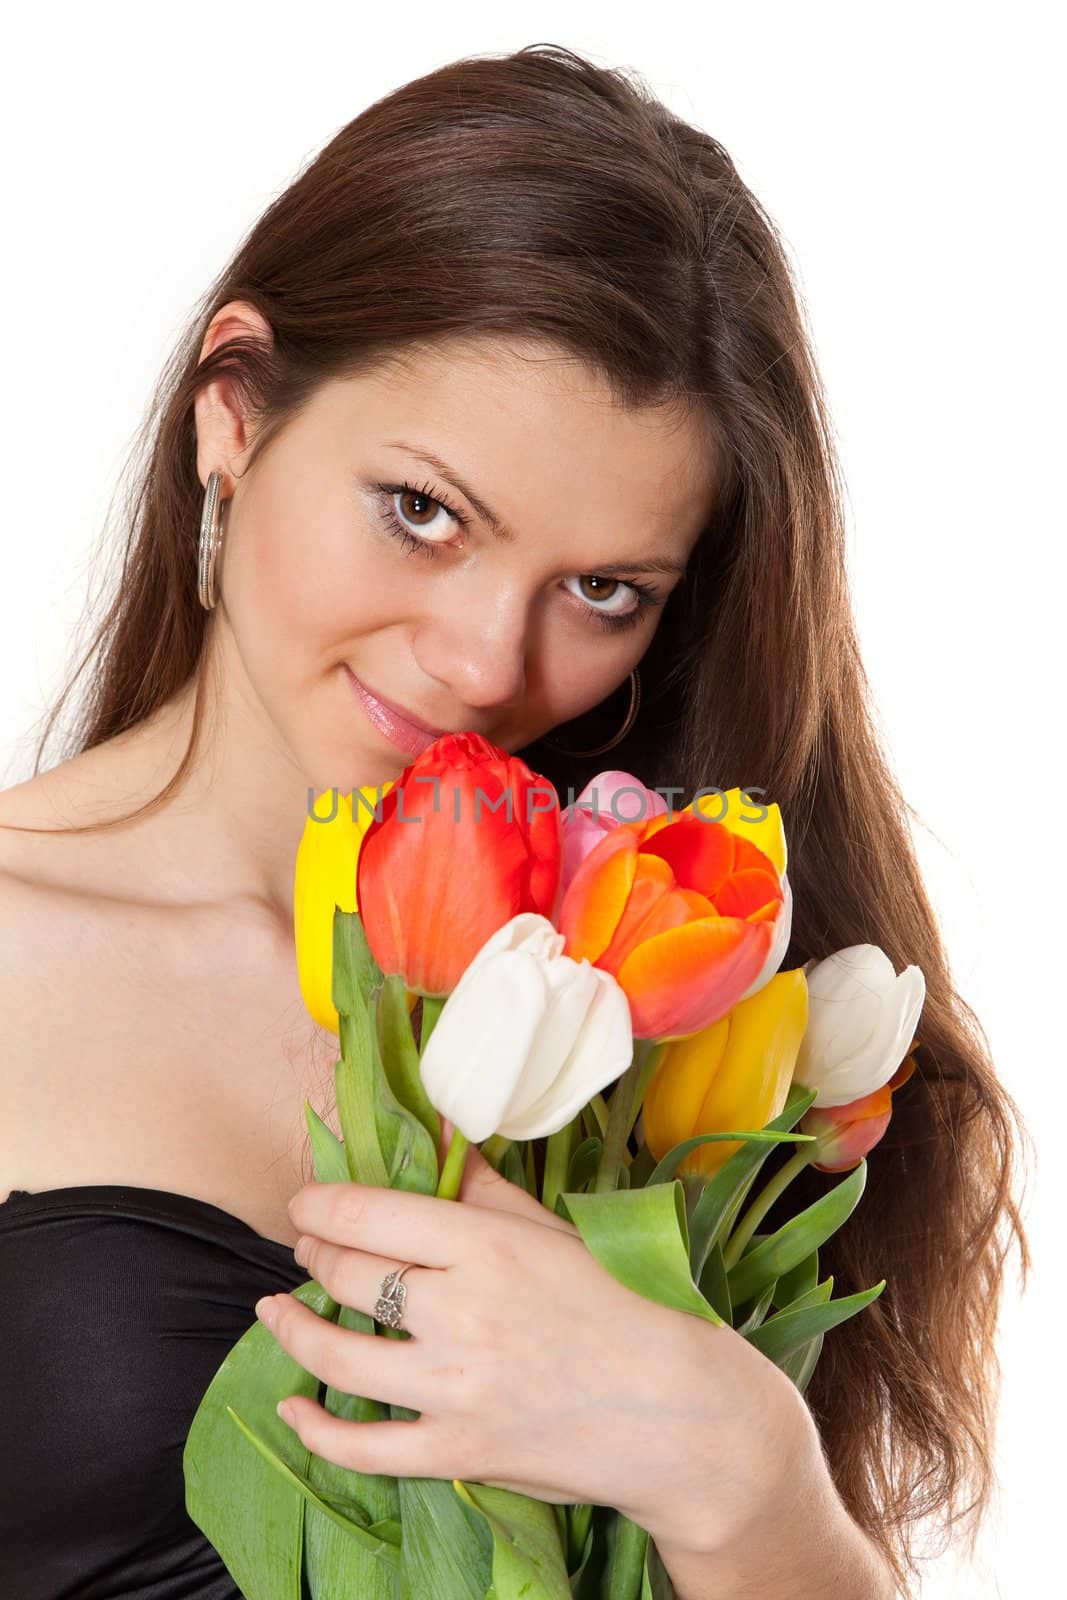 Beauty girl holding bouquet of tulips isolated on a white background